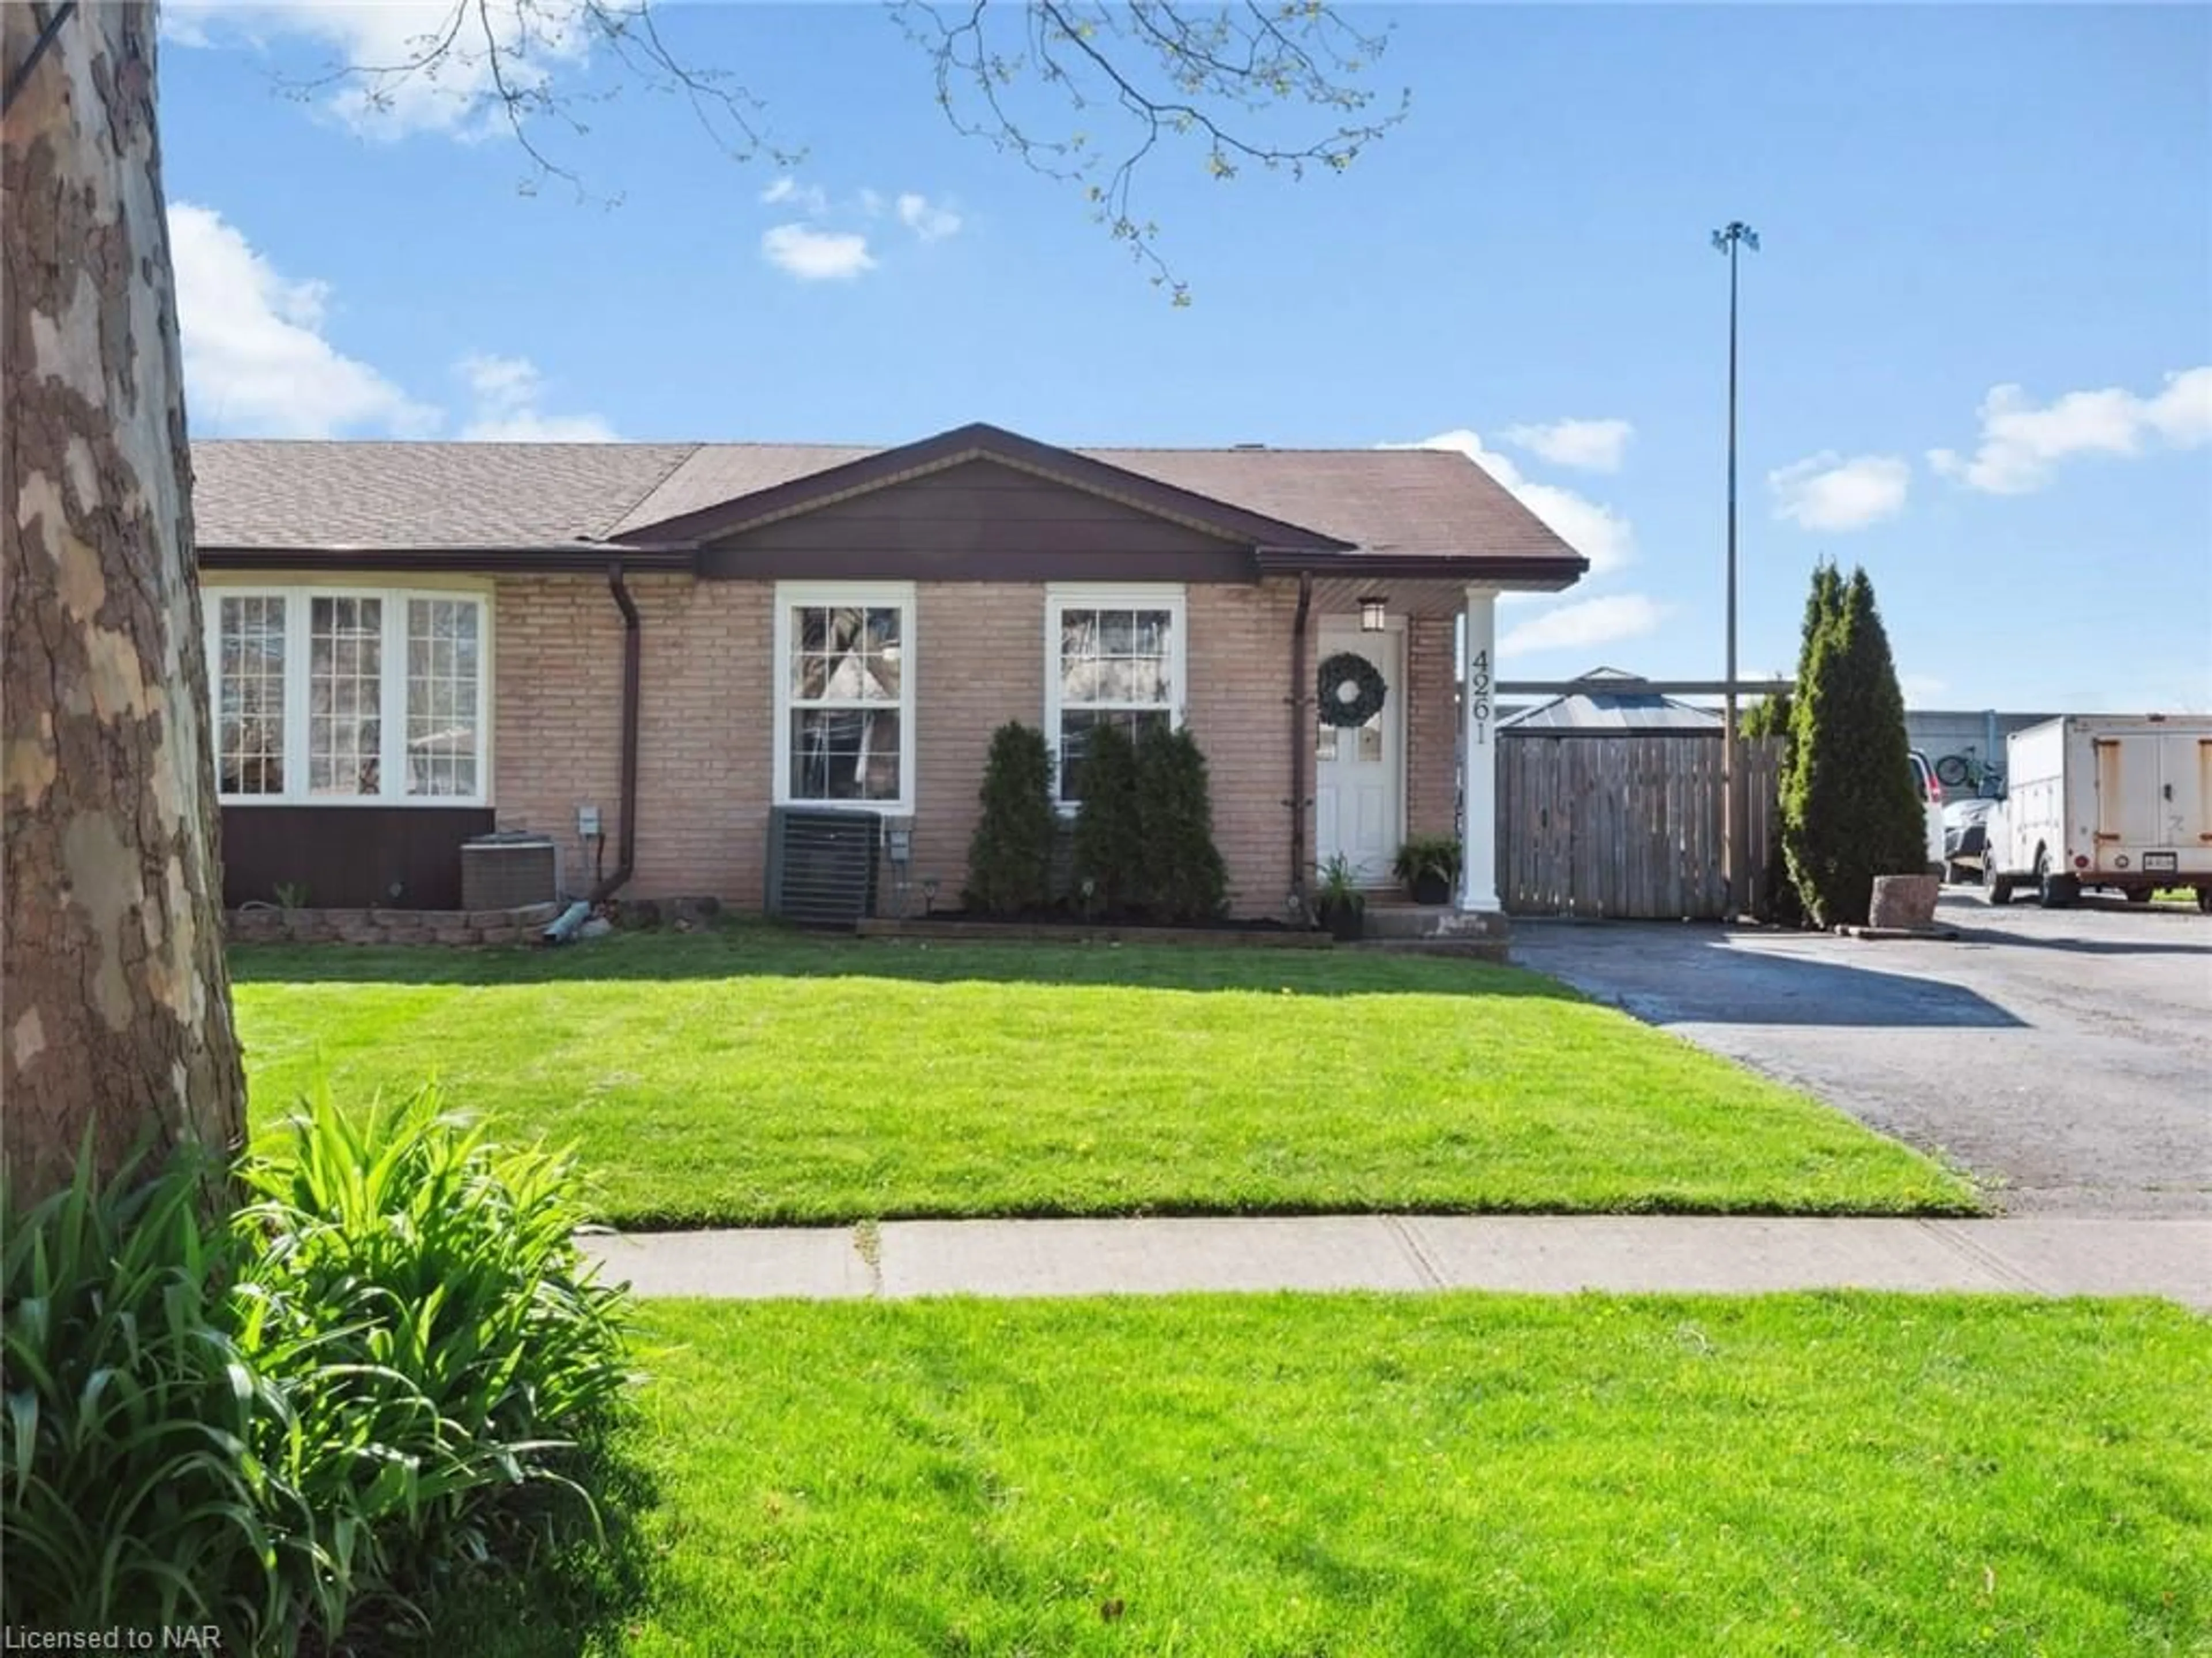 Frontside or backside of a home for 4261 Meadowvale Dr, Niagara Falls Ontario L2E 5W8